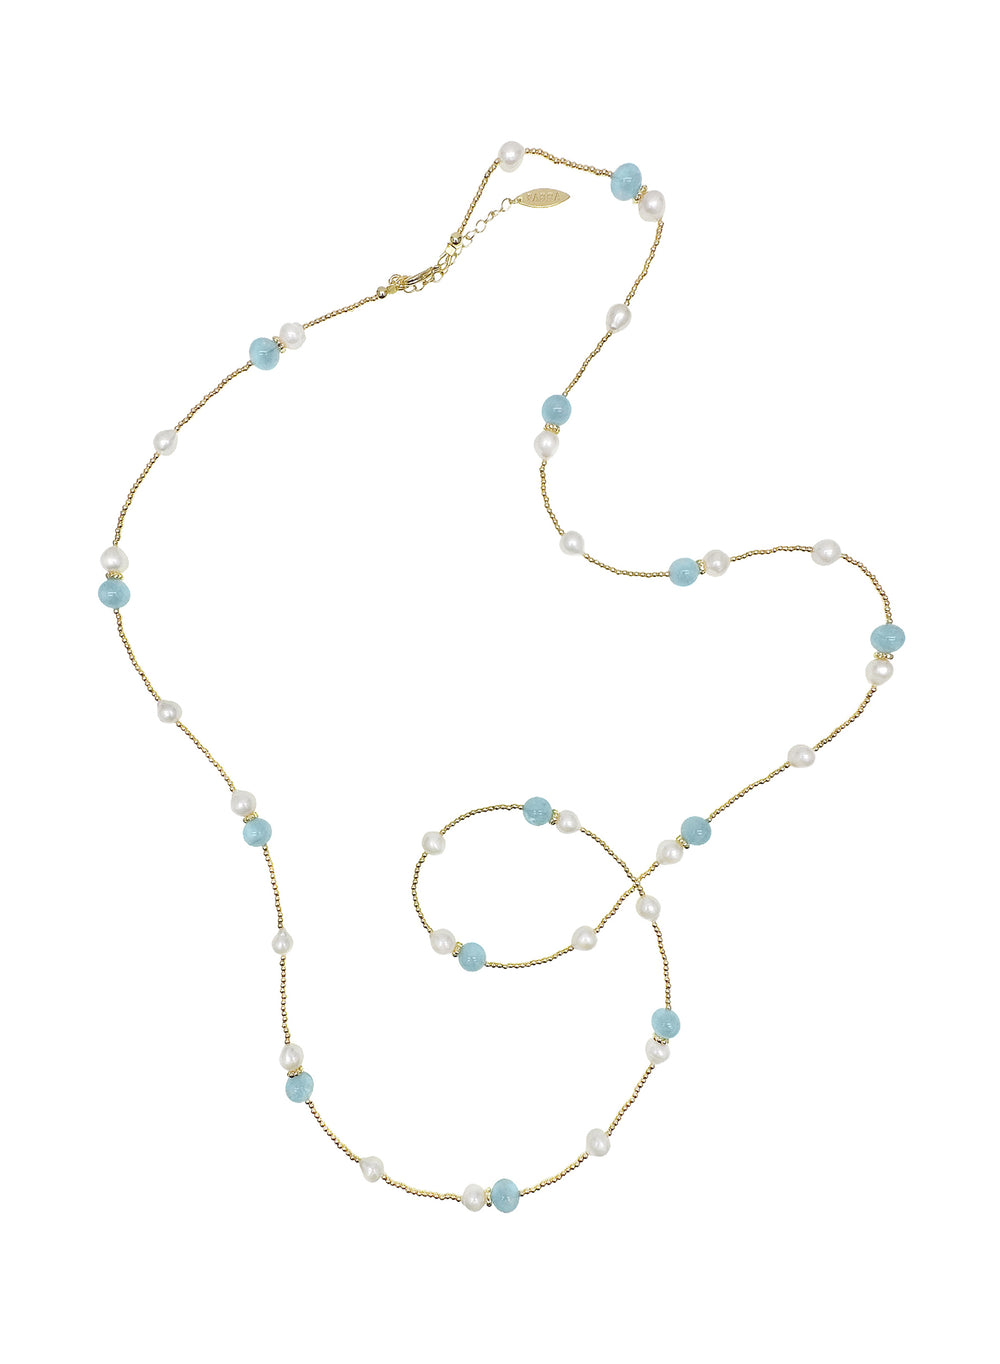 Aquamarine and Freshwater Pearls Long Necklace LN023 - FARRA